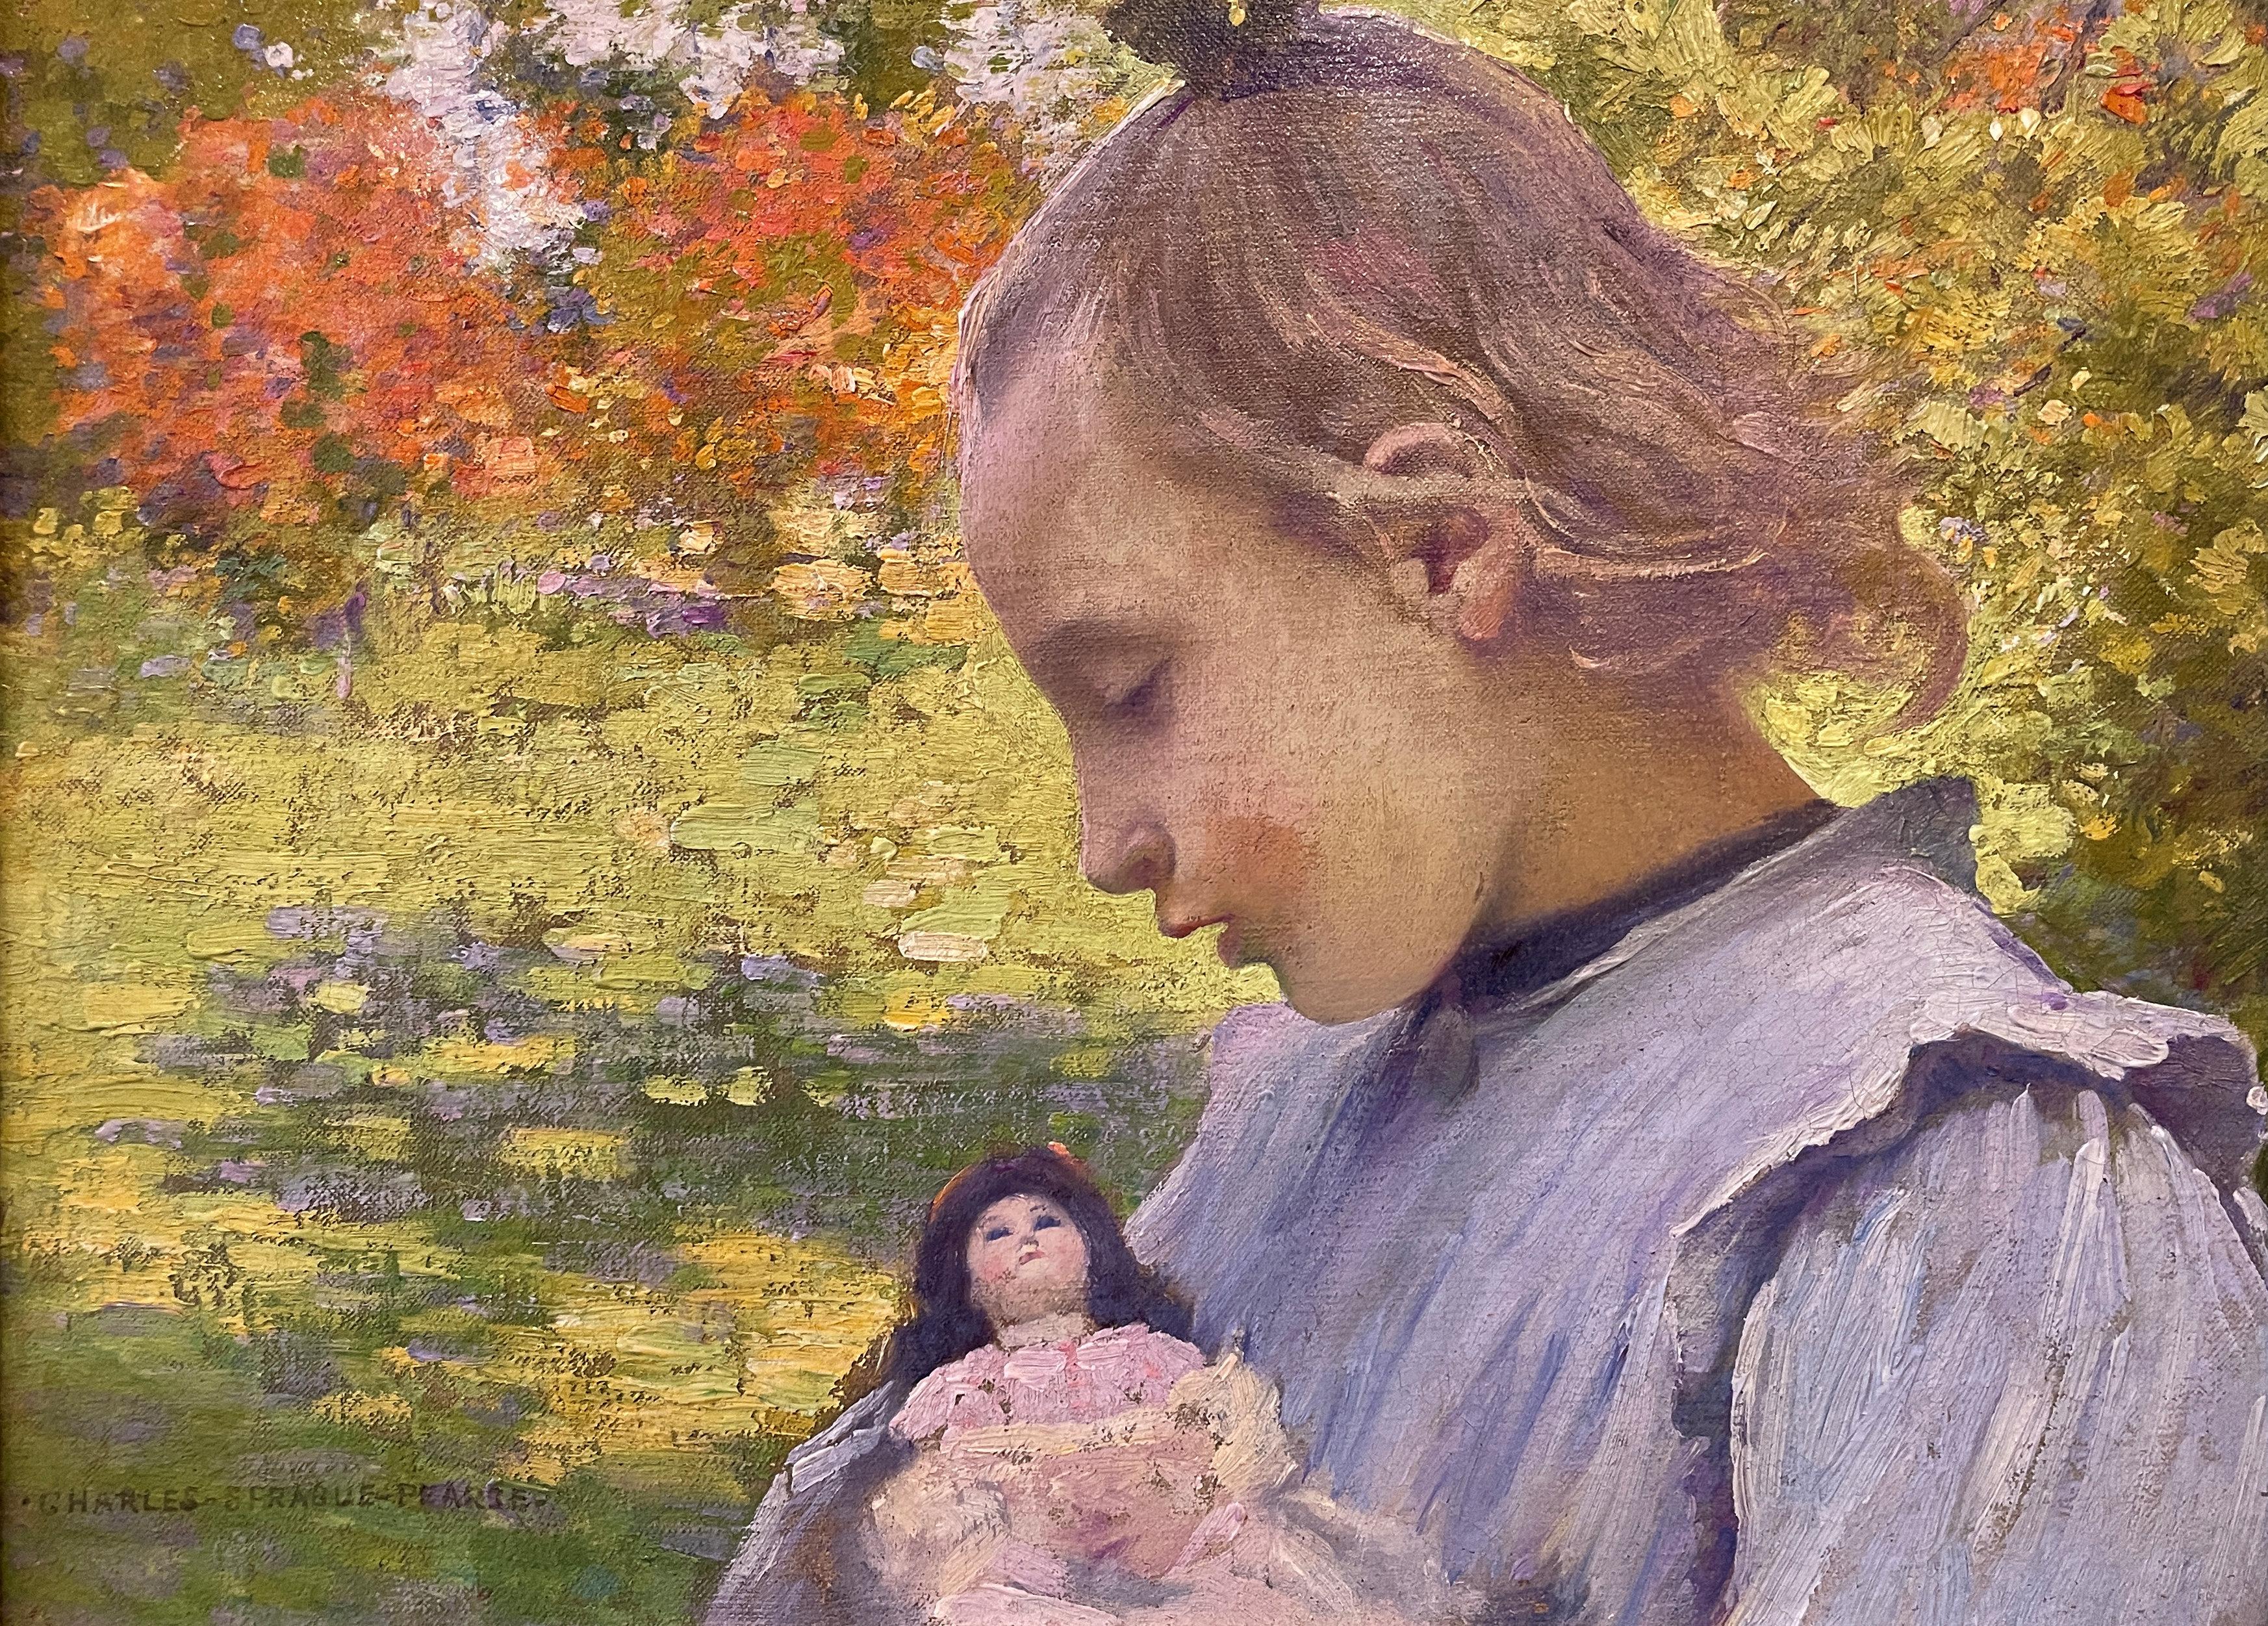 Charles Sprague Pearce
Girl with Doll, circa 1895
Signed lower left
Oil on canvas
10 x 14 inches

Provenance:
Estate of William S. Barrett
Pierce Galleries, East Bridgewater, Massachusetts

Charles Sprague Pearce made a successful career painting